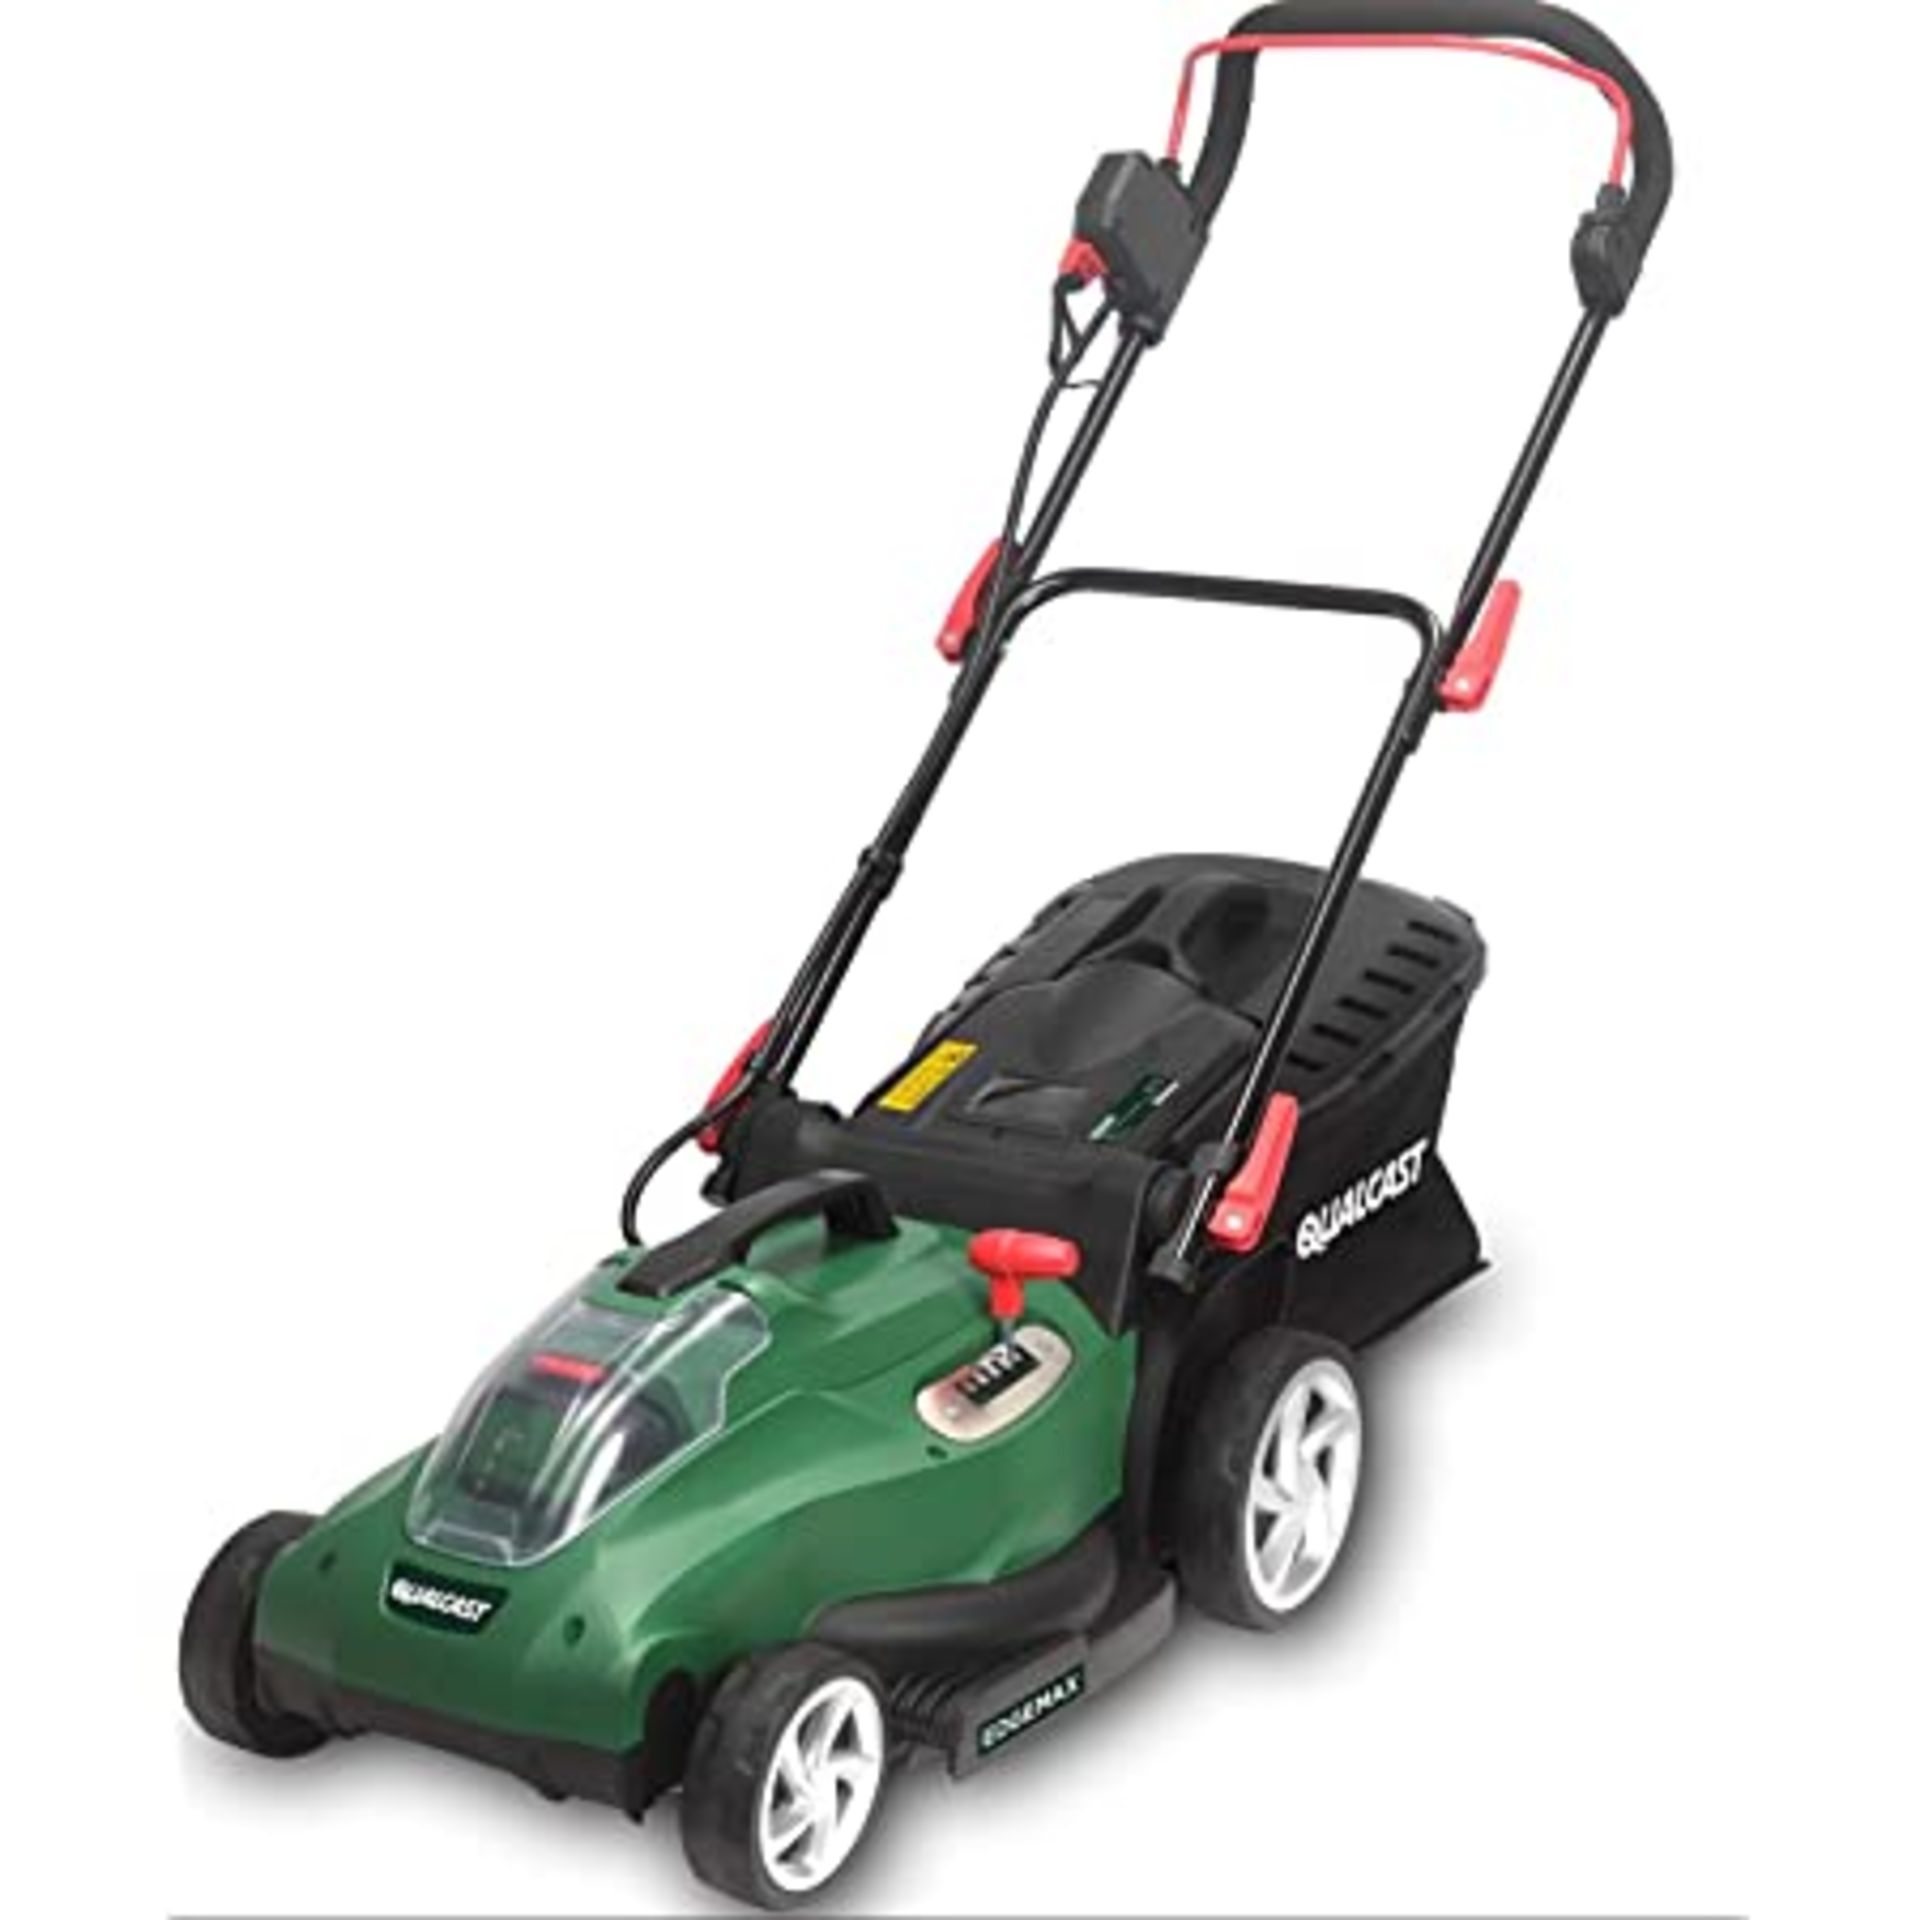 (R13D) 1x Qualcast 38cm 36V 2.5Ah Cordless Rotary Lawn Mower. (With Battery & Charger).